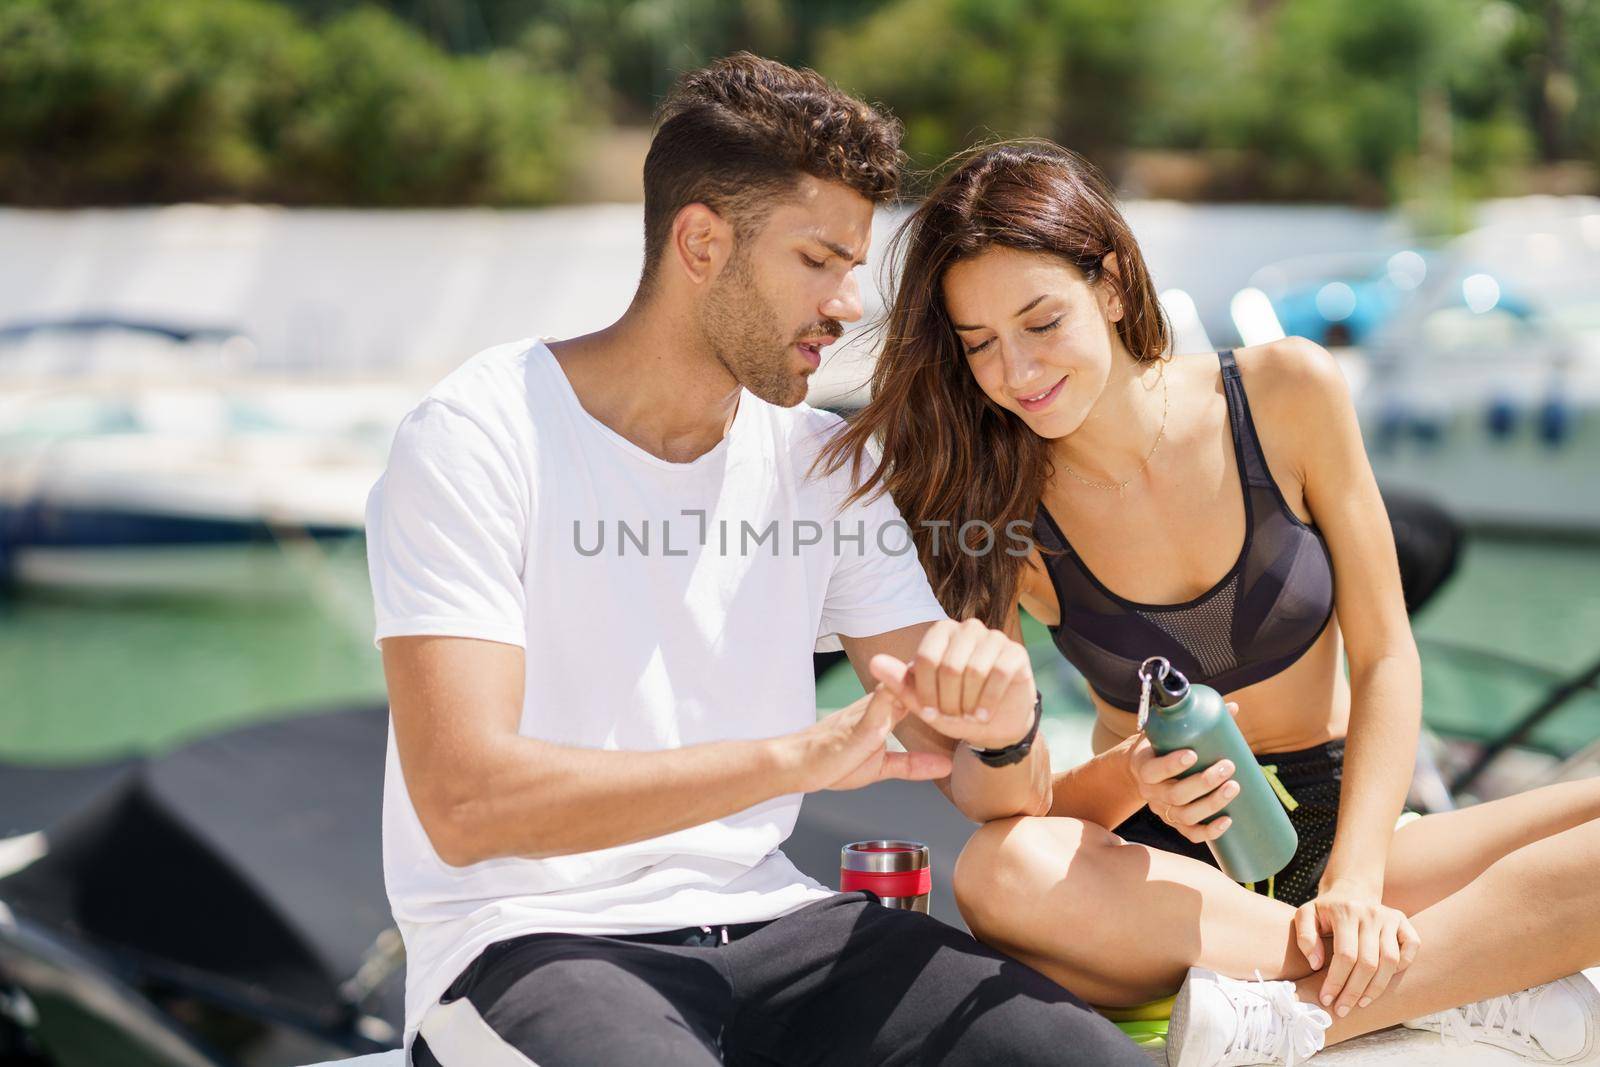 Man showing his marks to an athletic woman on a sports watch after exercise. People using smartwatch.